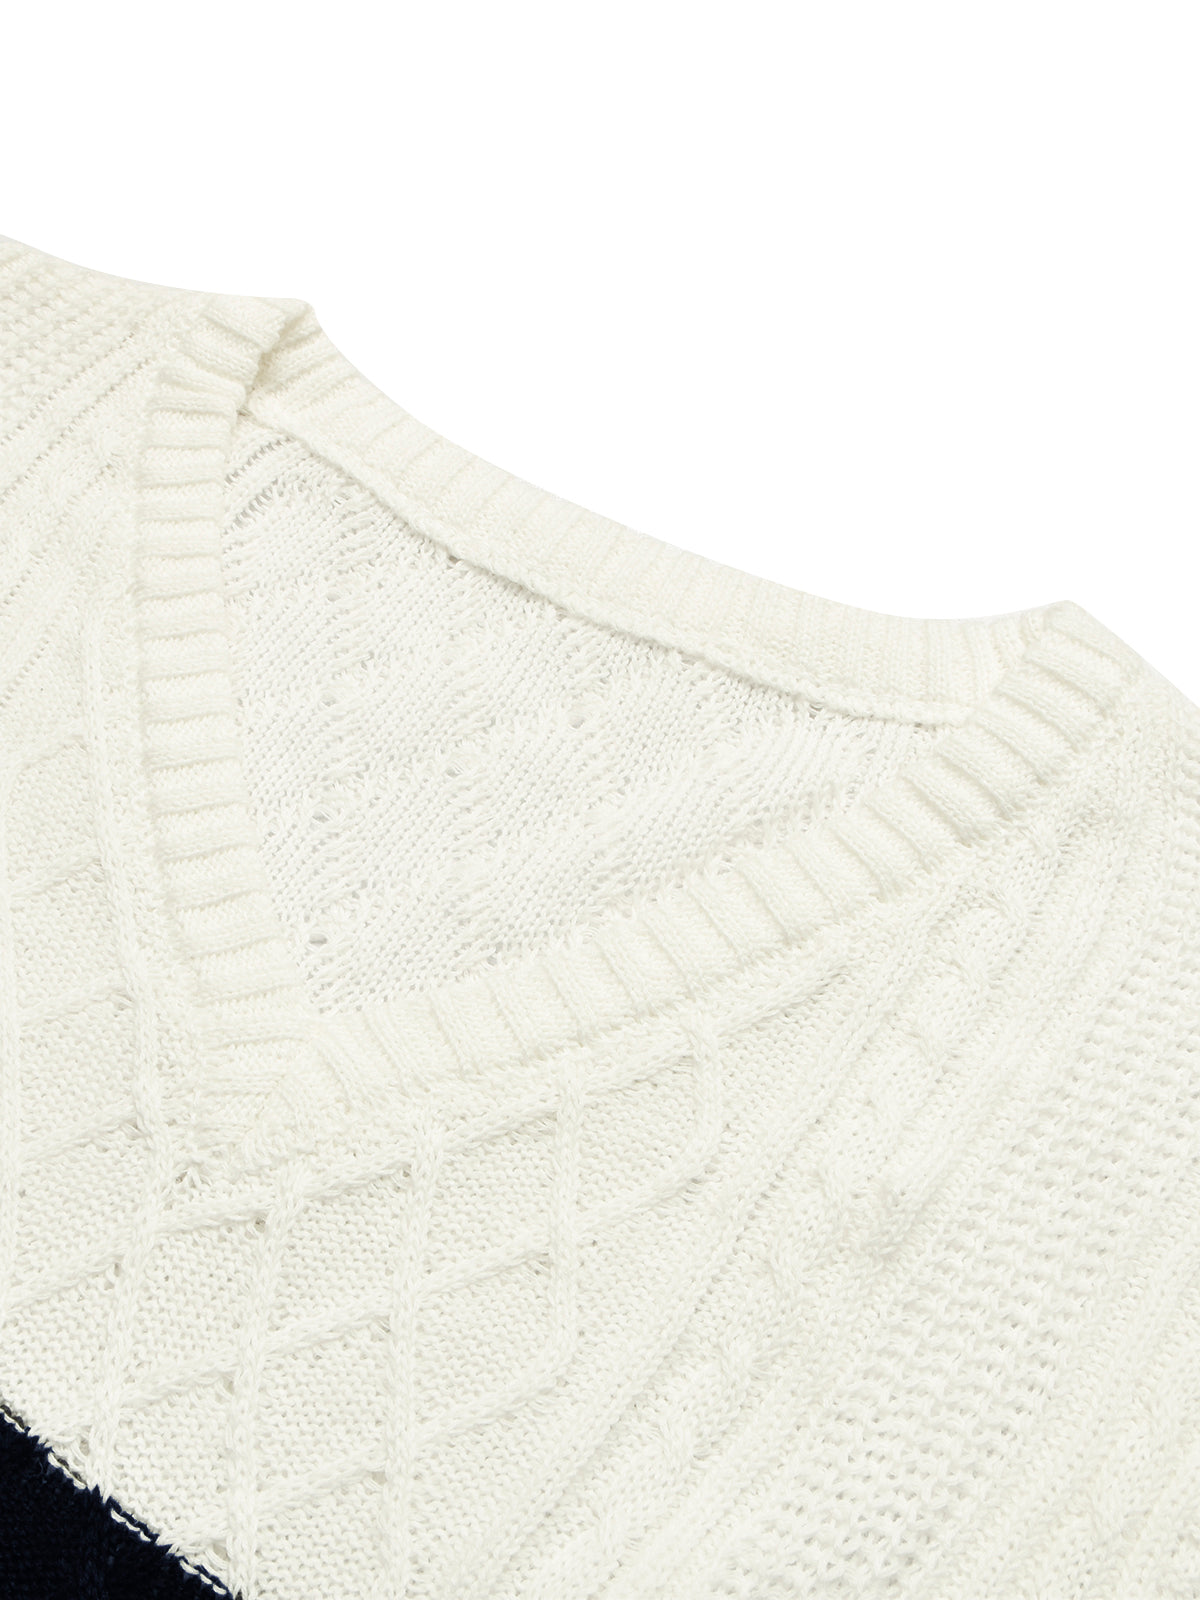 Sixteen Fashion Half Sleeve Knitted Wool Sweater For Women-Off White BE469/BR1225